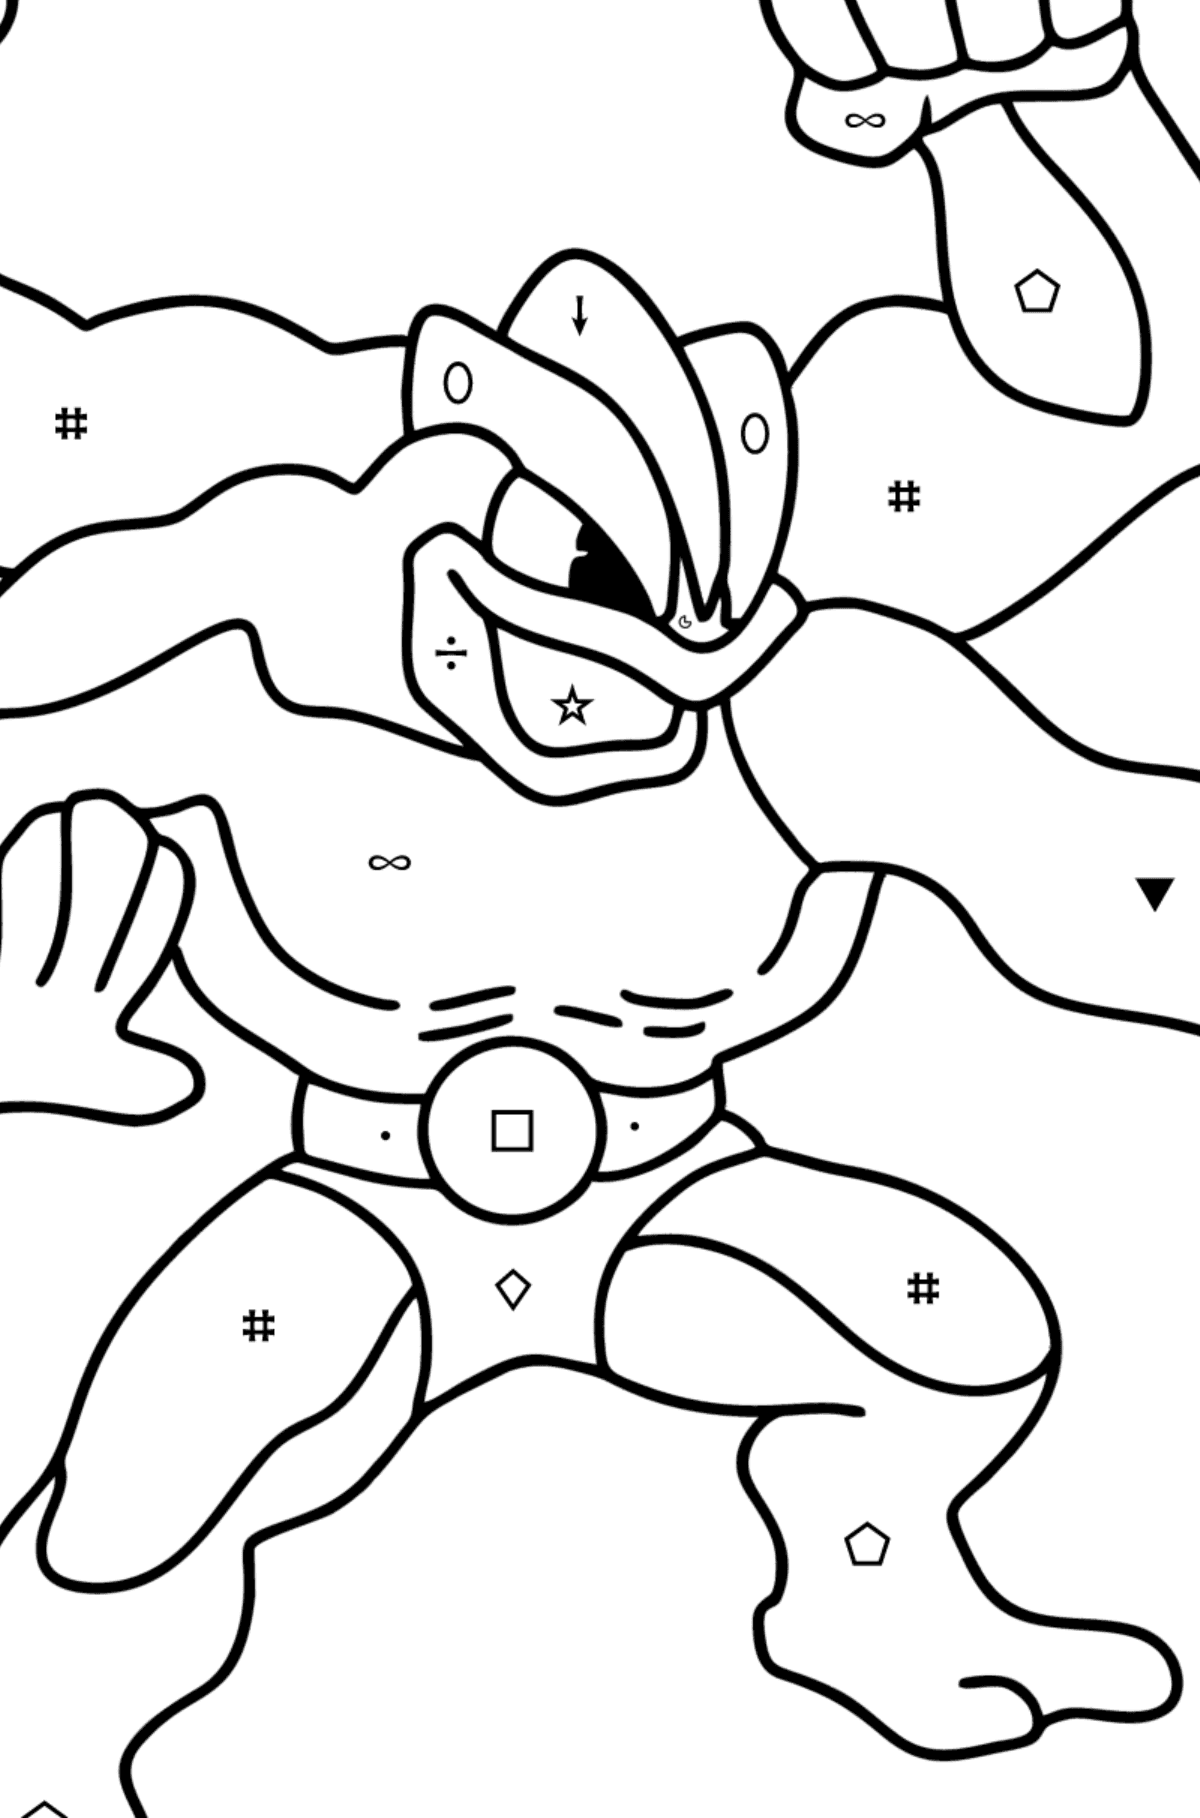 Coloring page Pokemon Go Machamp - Coloring by Symbols and Geometric Shapes for Kids